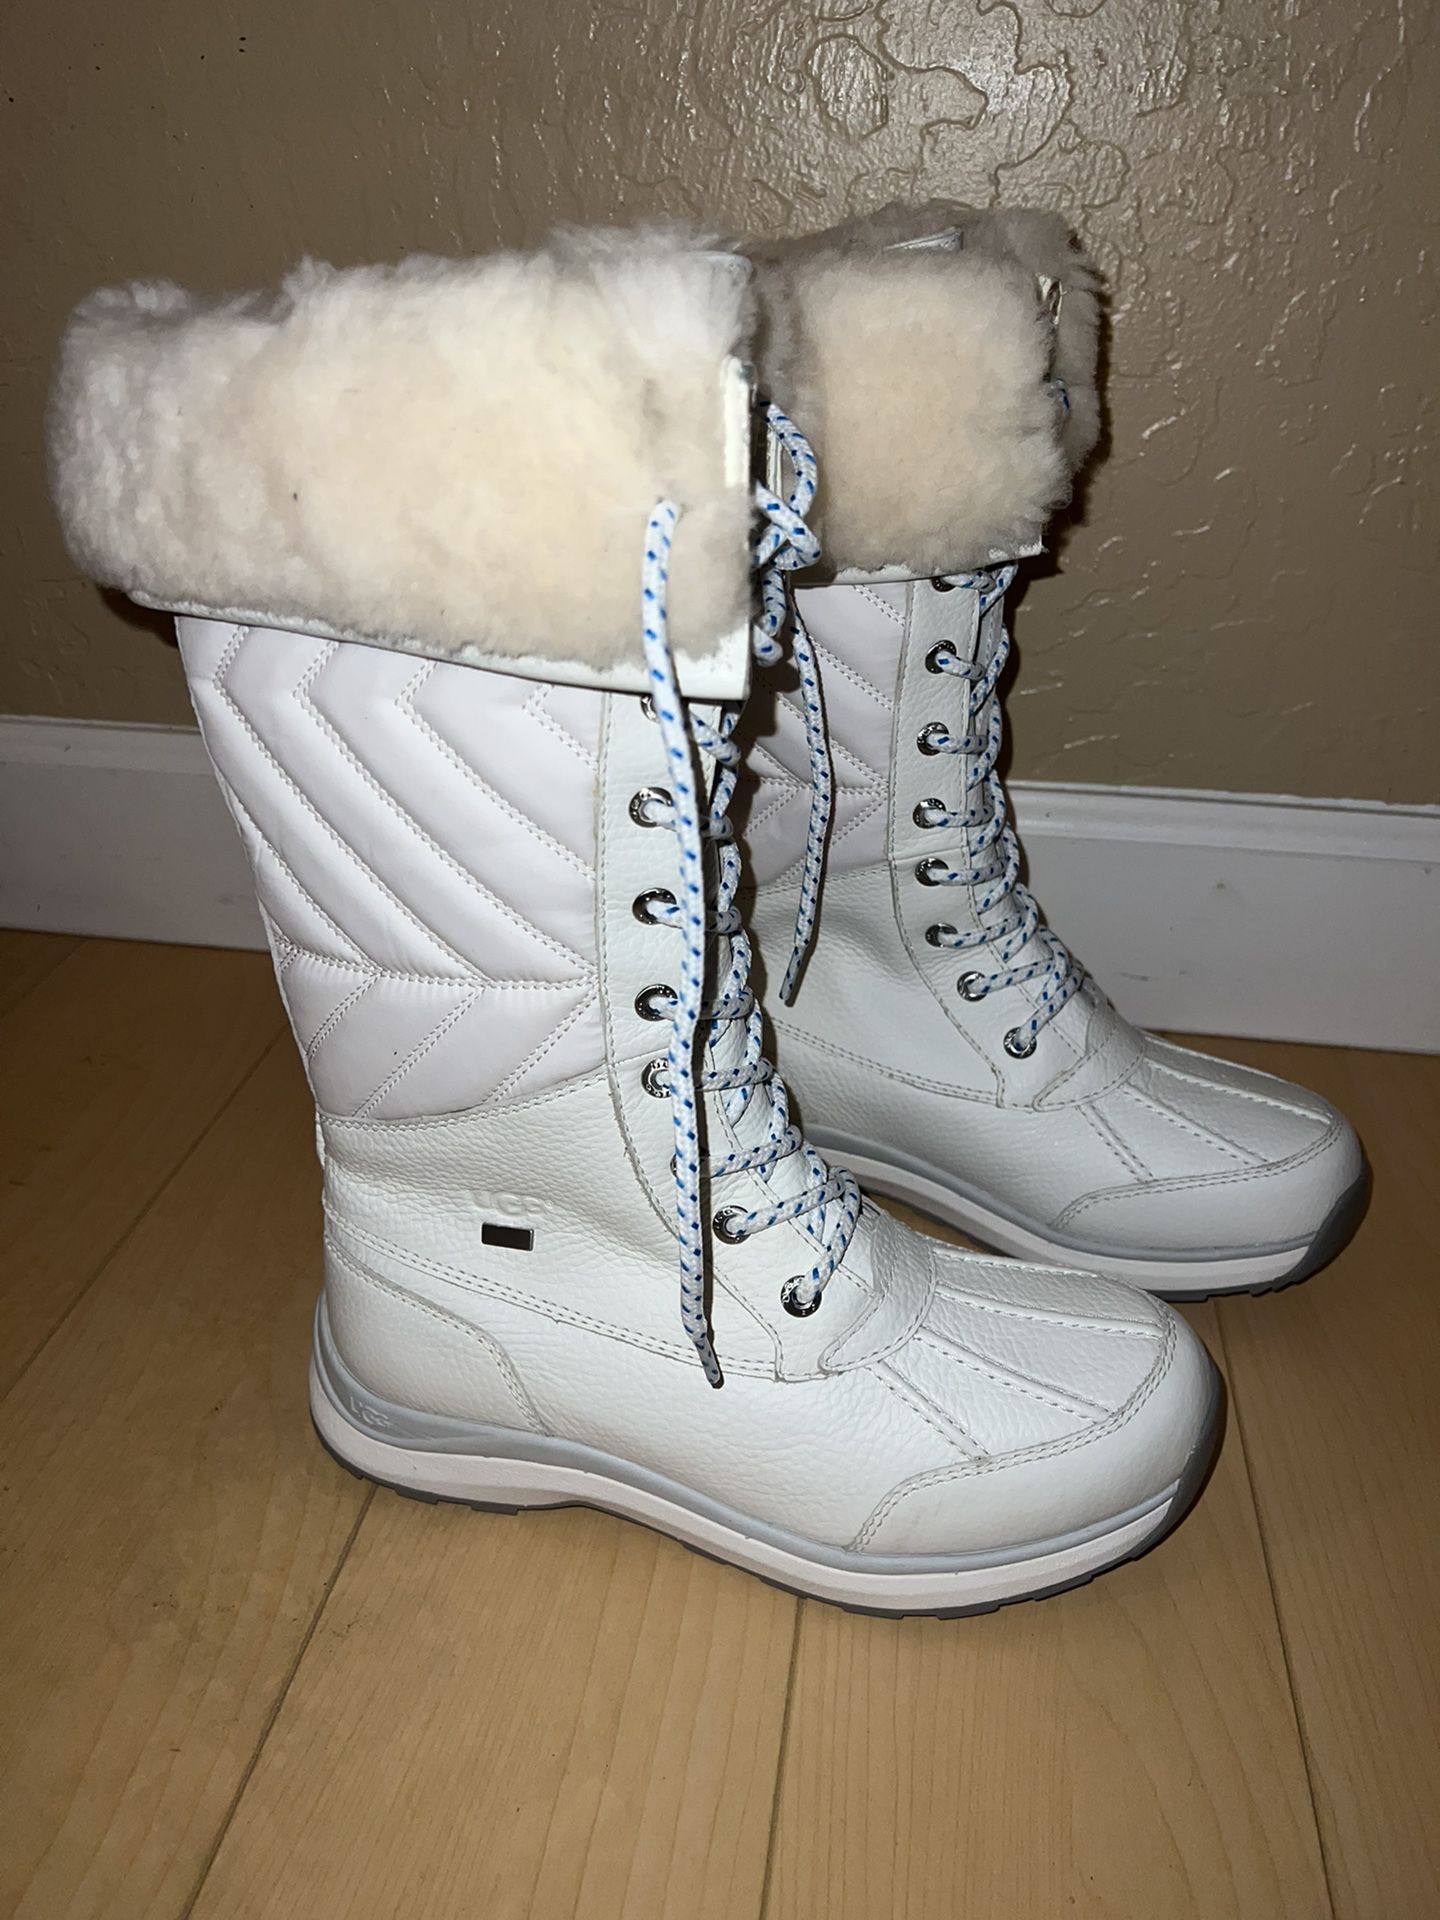 Brand New Ugg Snow Boots 